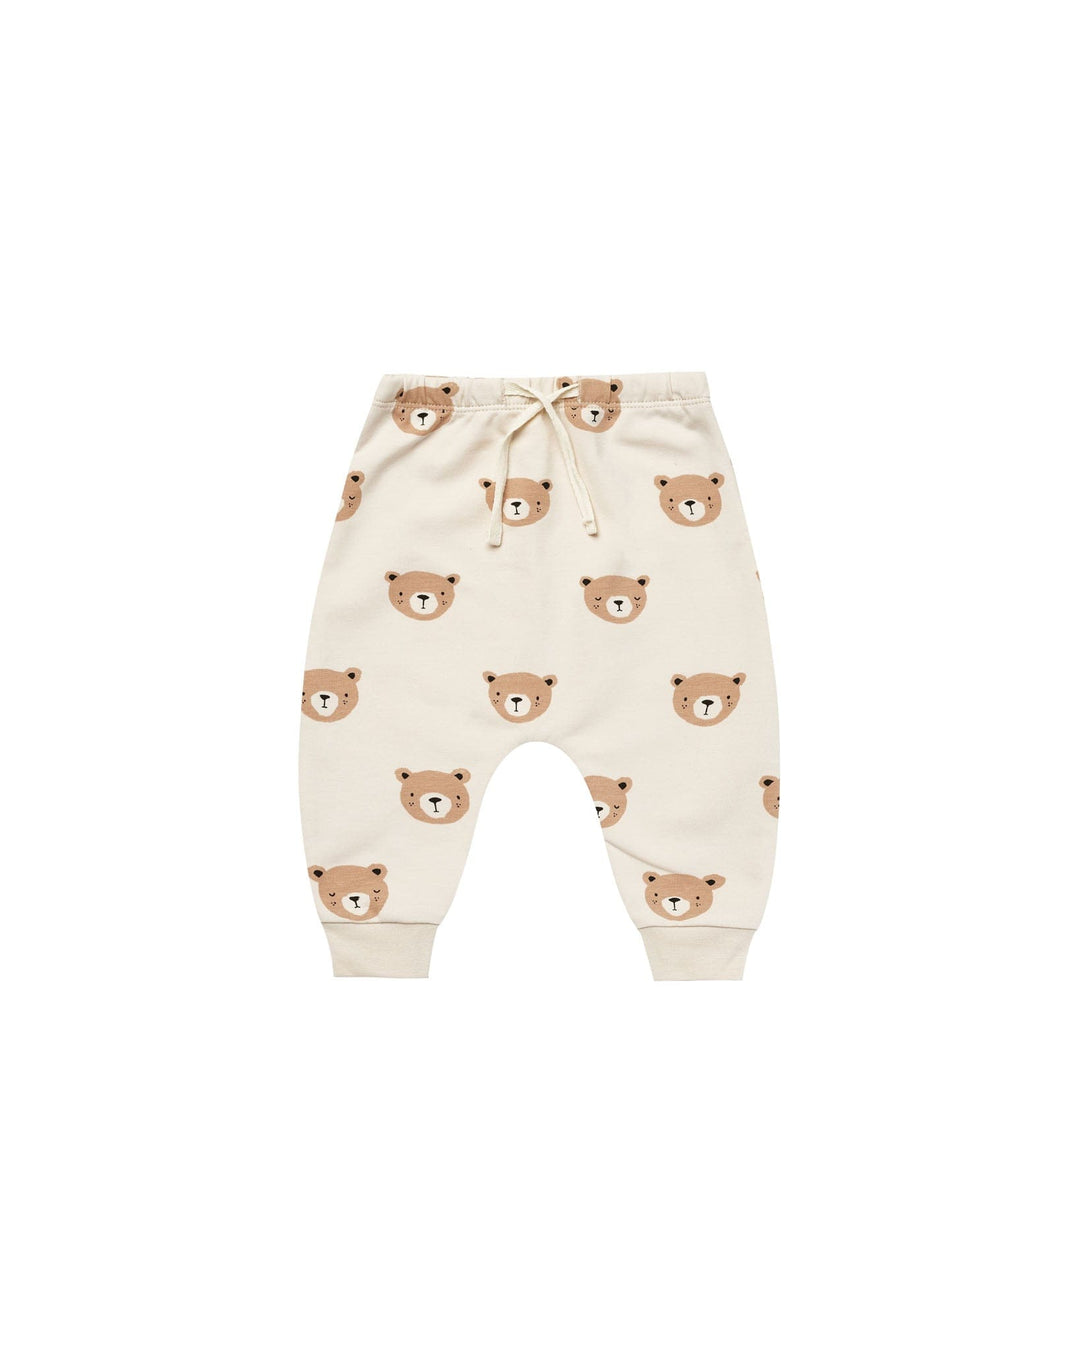 Quincy Mae Baby & Toddler Bottoms Sweatpant - Teddy